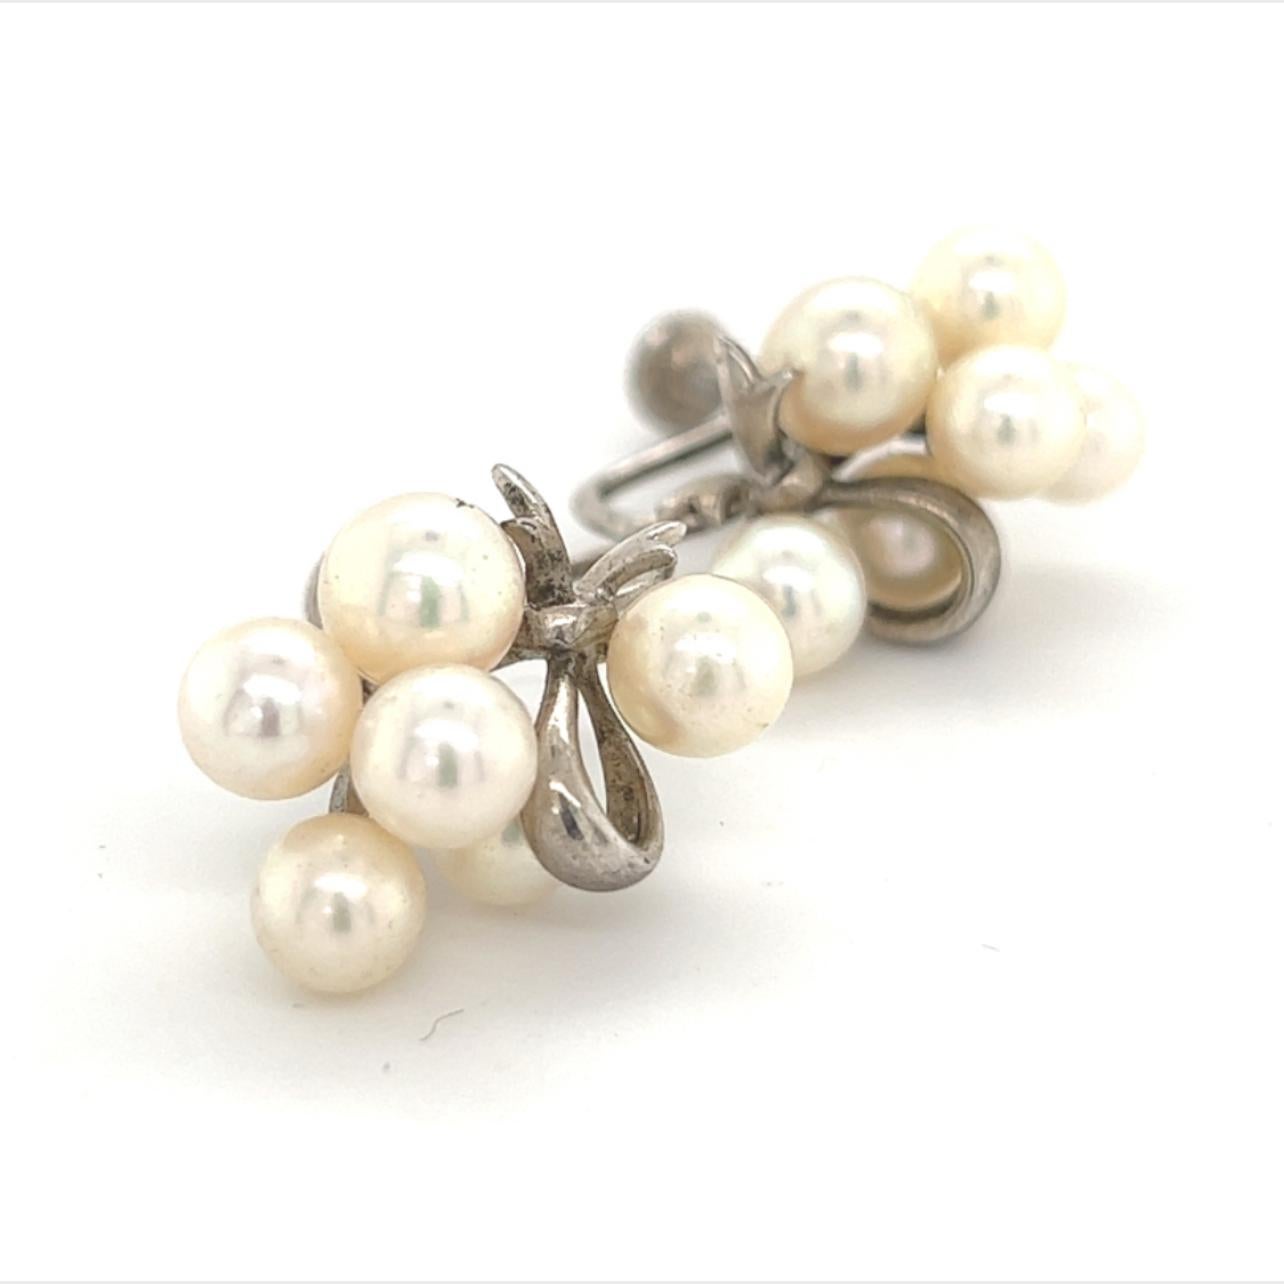 Mikimoto Estate Akoya Pearl Earrings Sterling Silver 6.65 mm 7.2 Grams M235

These elegant Authentic Mikimoto Estate Akoya pearl earrings are made of sterling silver and have 12 Akoya Cultured Pearls.

TRUSTED SELLER SINCE 2002

PLEASE SEE OUR